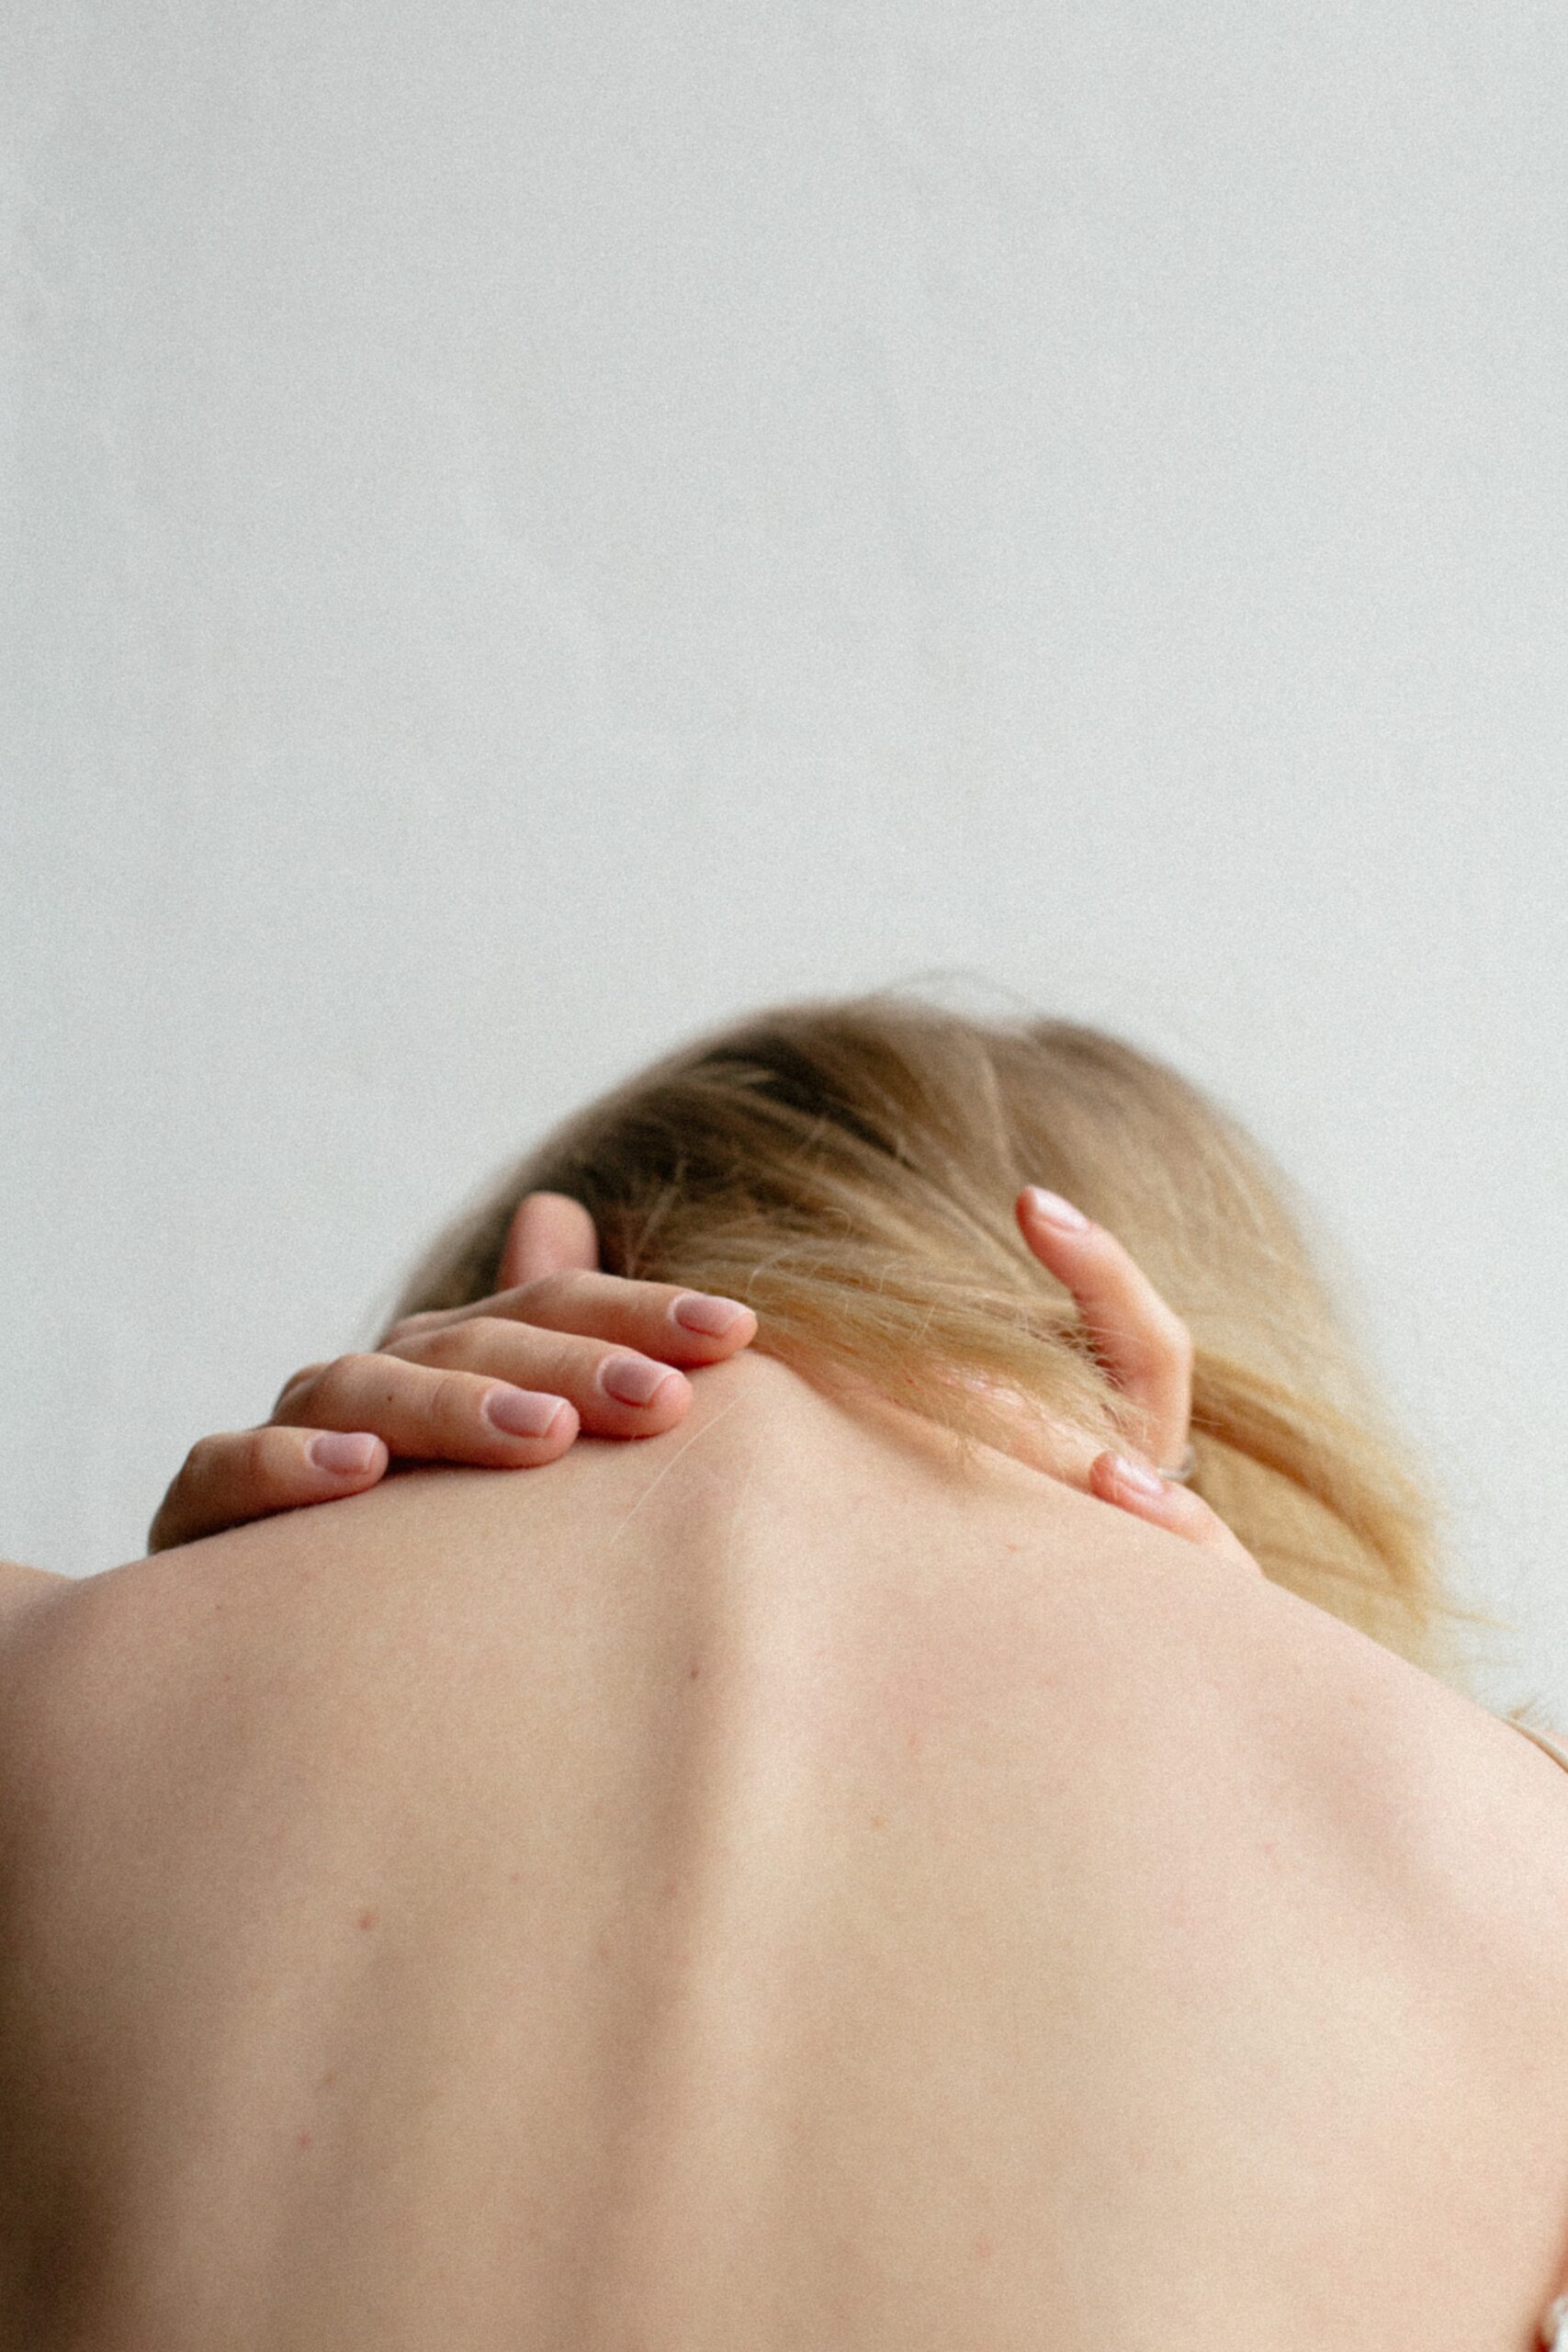 Musculoskeletal Pain - Triggers and Treatment